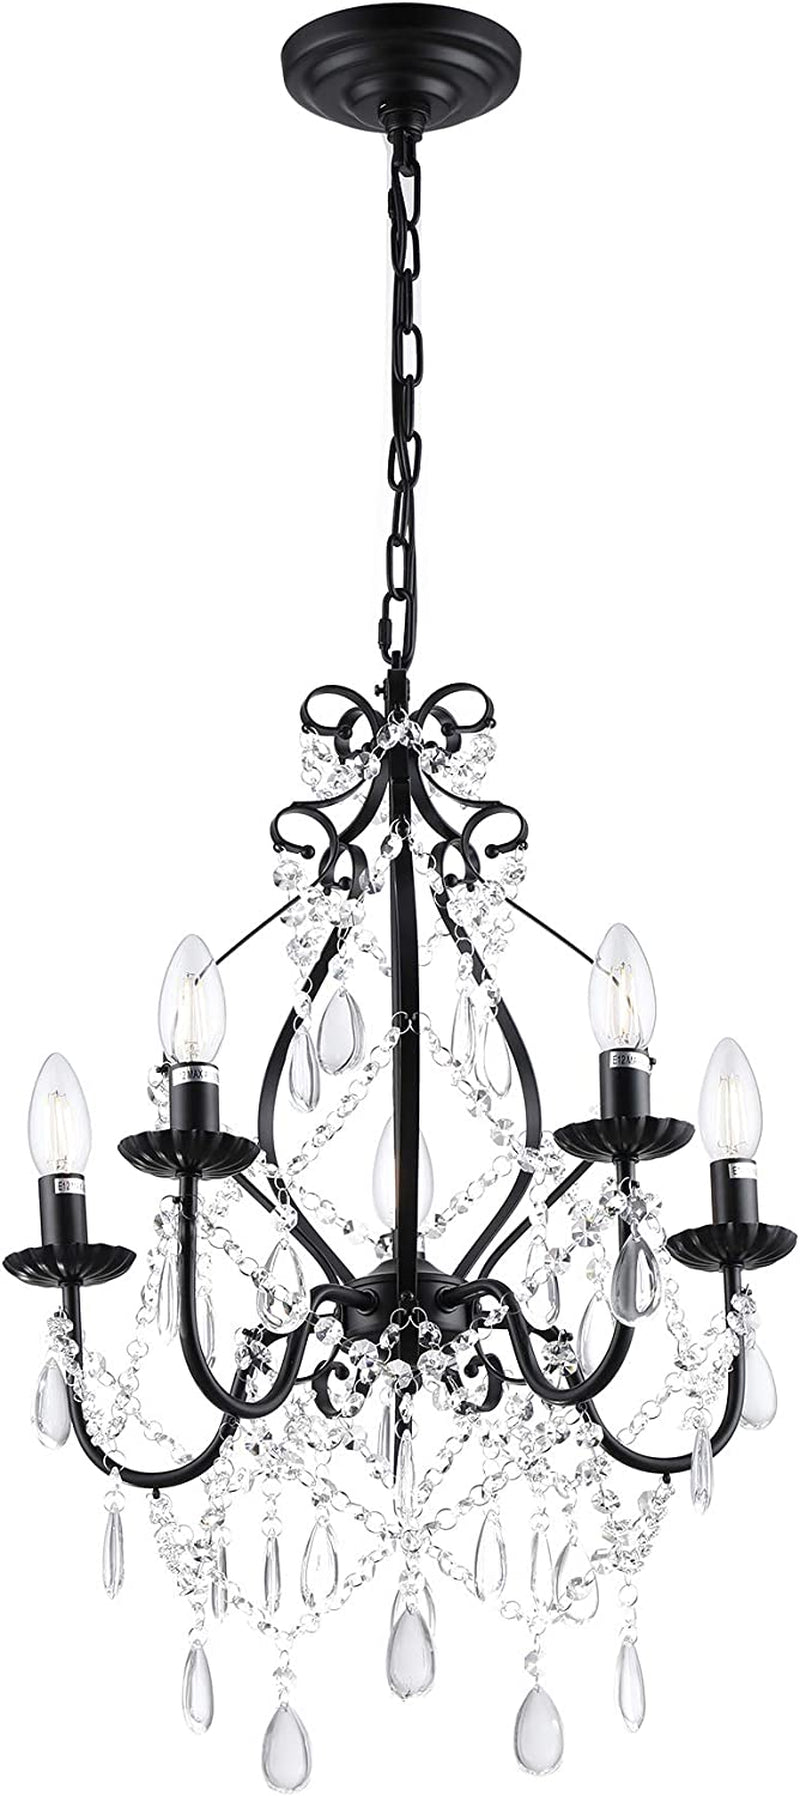 Riomasee Mini Crystal Chandelier 5 Lights Black Chandelier with K9 Crystal Raindrop Iron Ceiling Light Fixtures for Bedroom,Dining,Living Room,Kitchen Lighting Home & Garden > Lighting > Lighting Fixtures > Chandeliers riomasee   